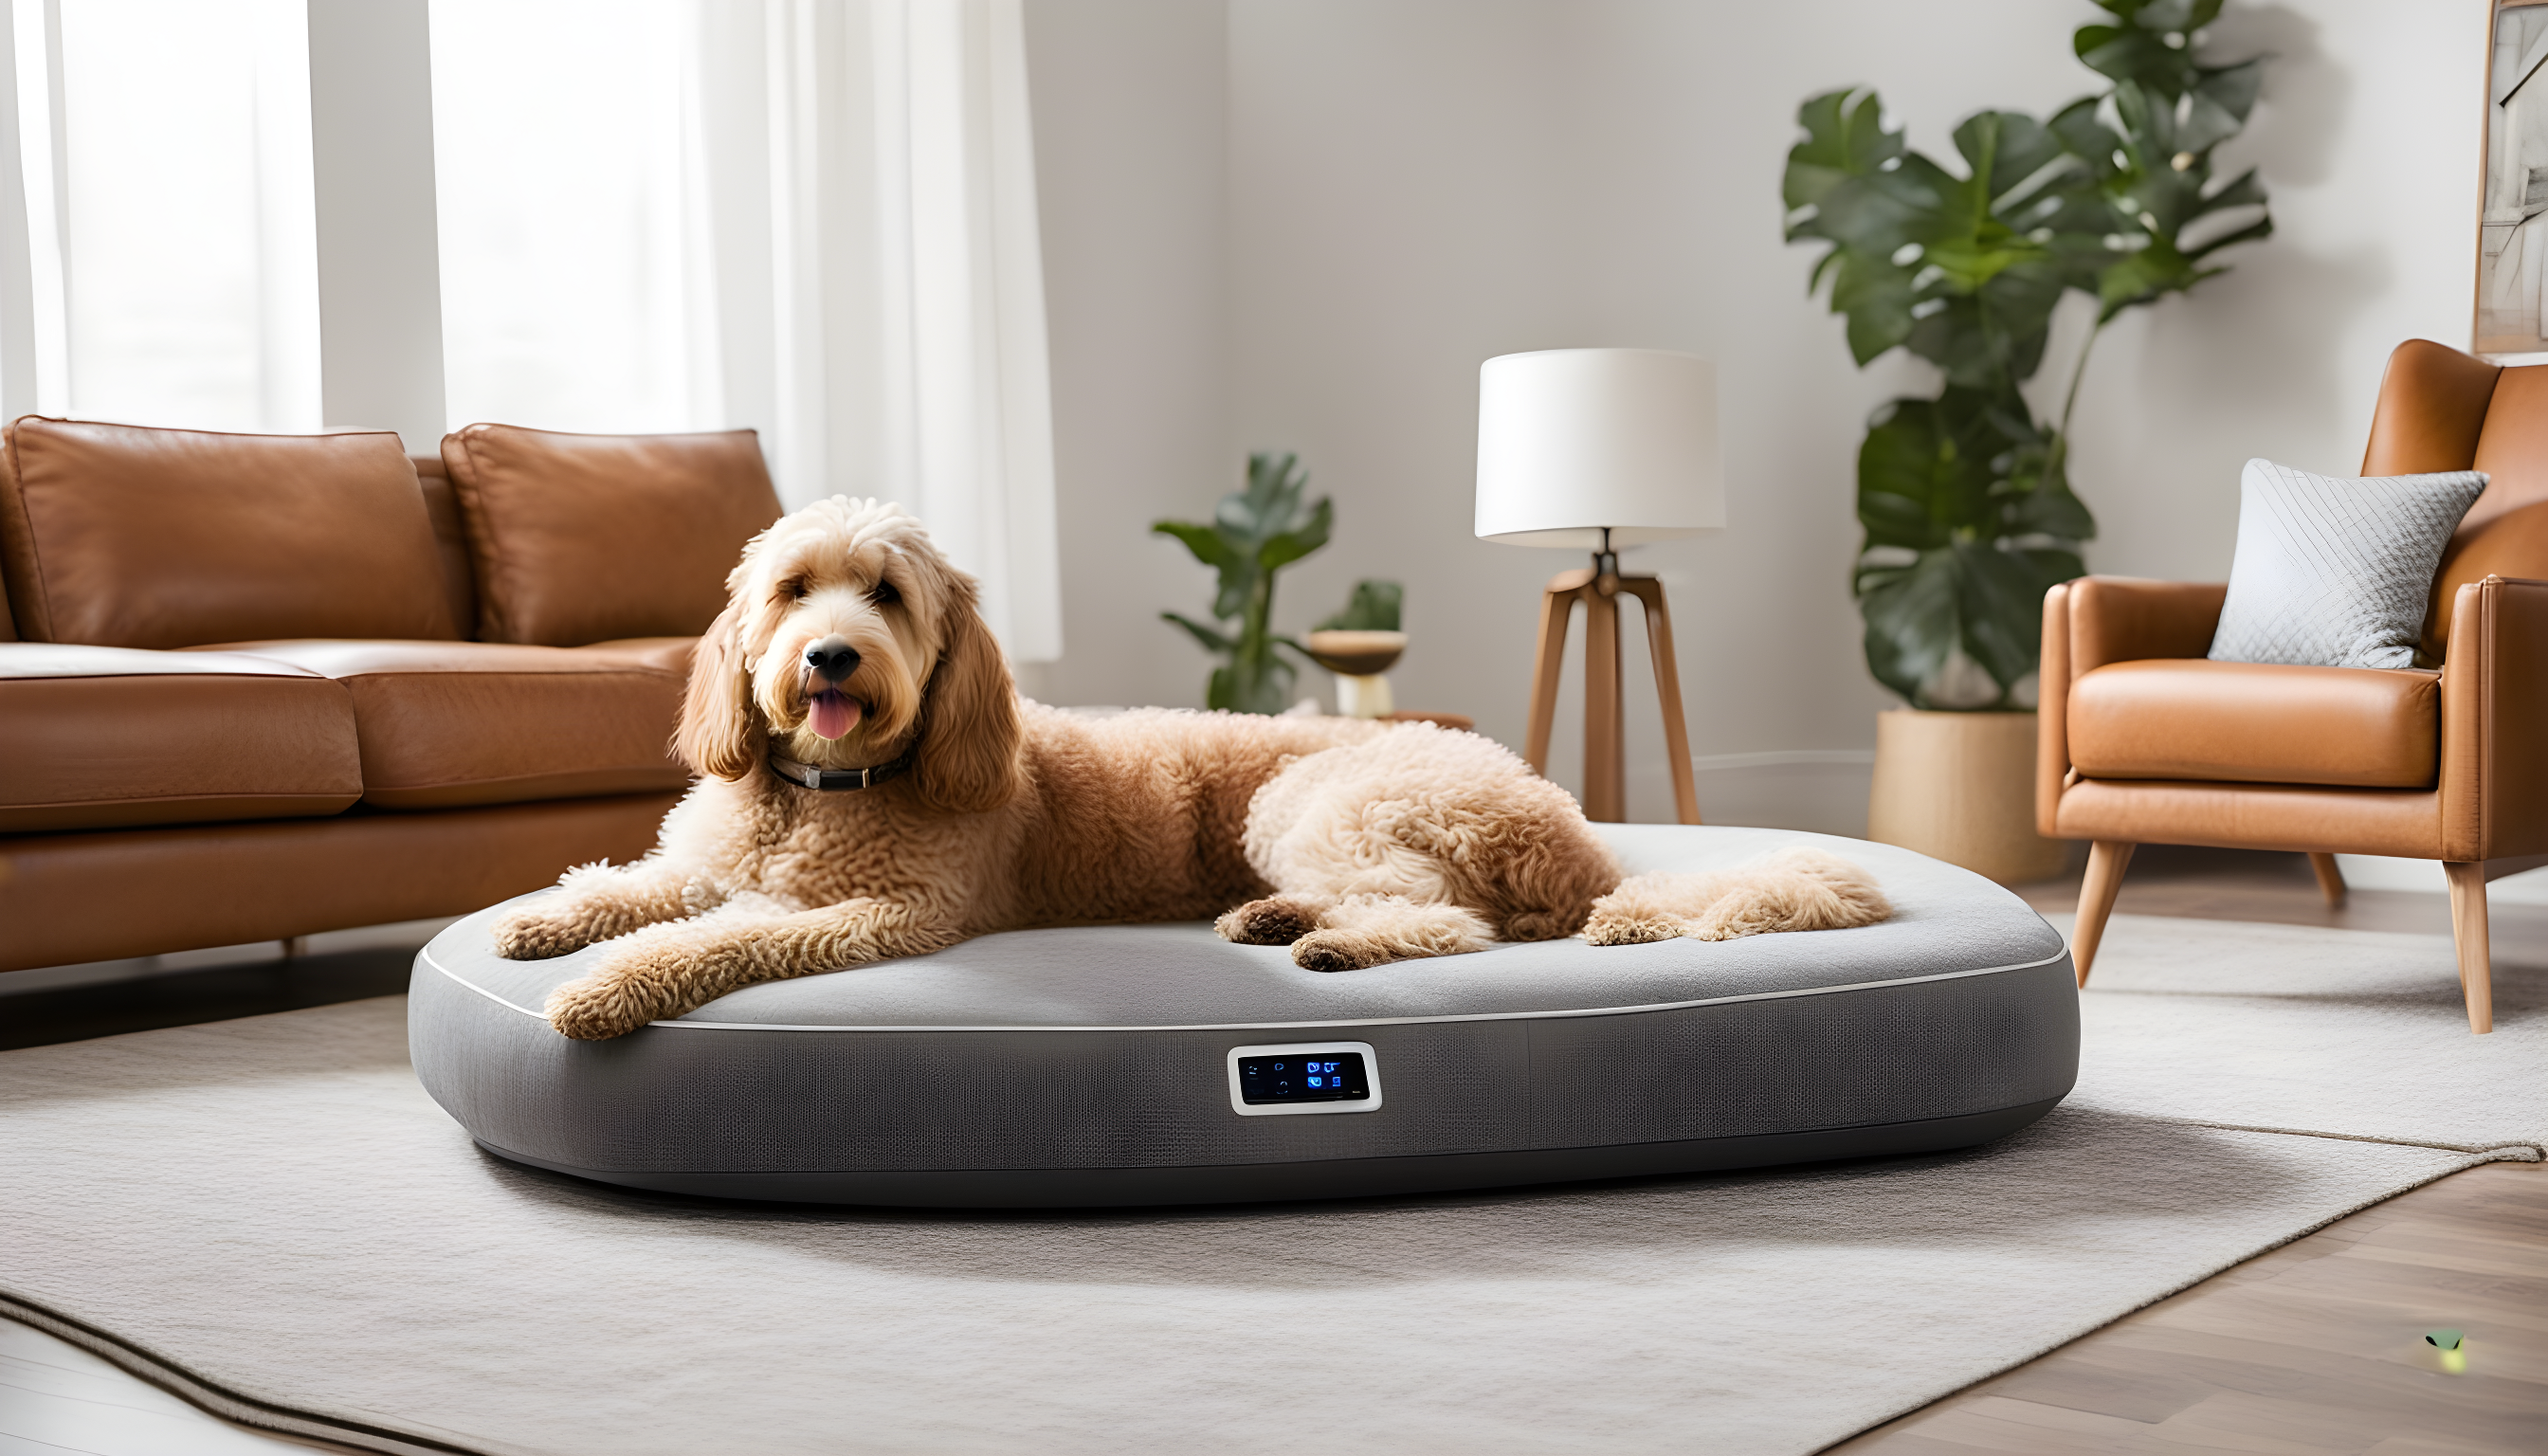 A well-prepared living room featuring an air purifier, hypoallergenic bedding, and a Labradoodle lounging comfortably on a designated dog bed.